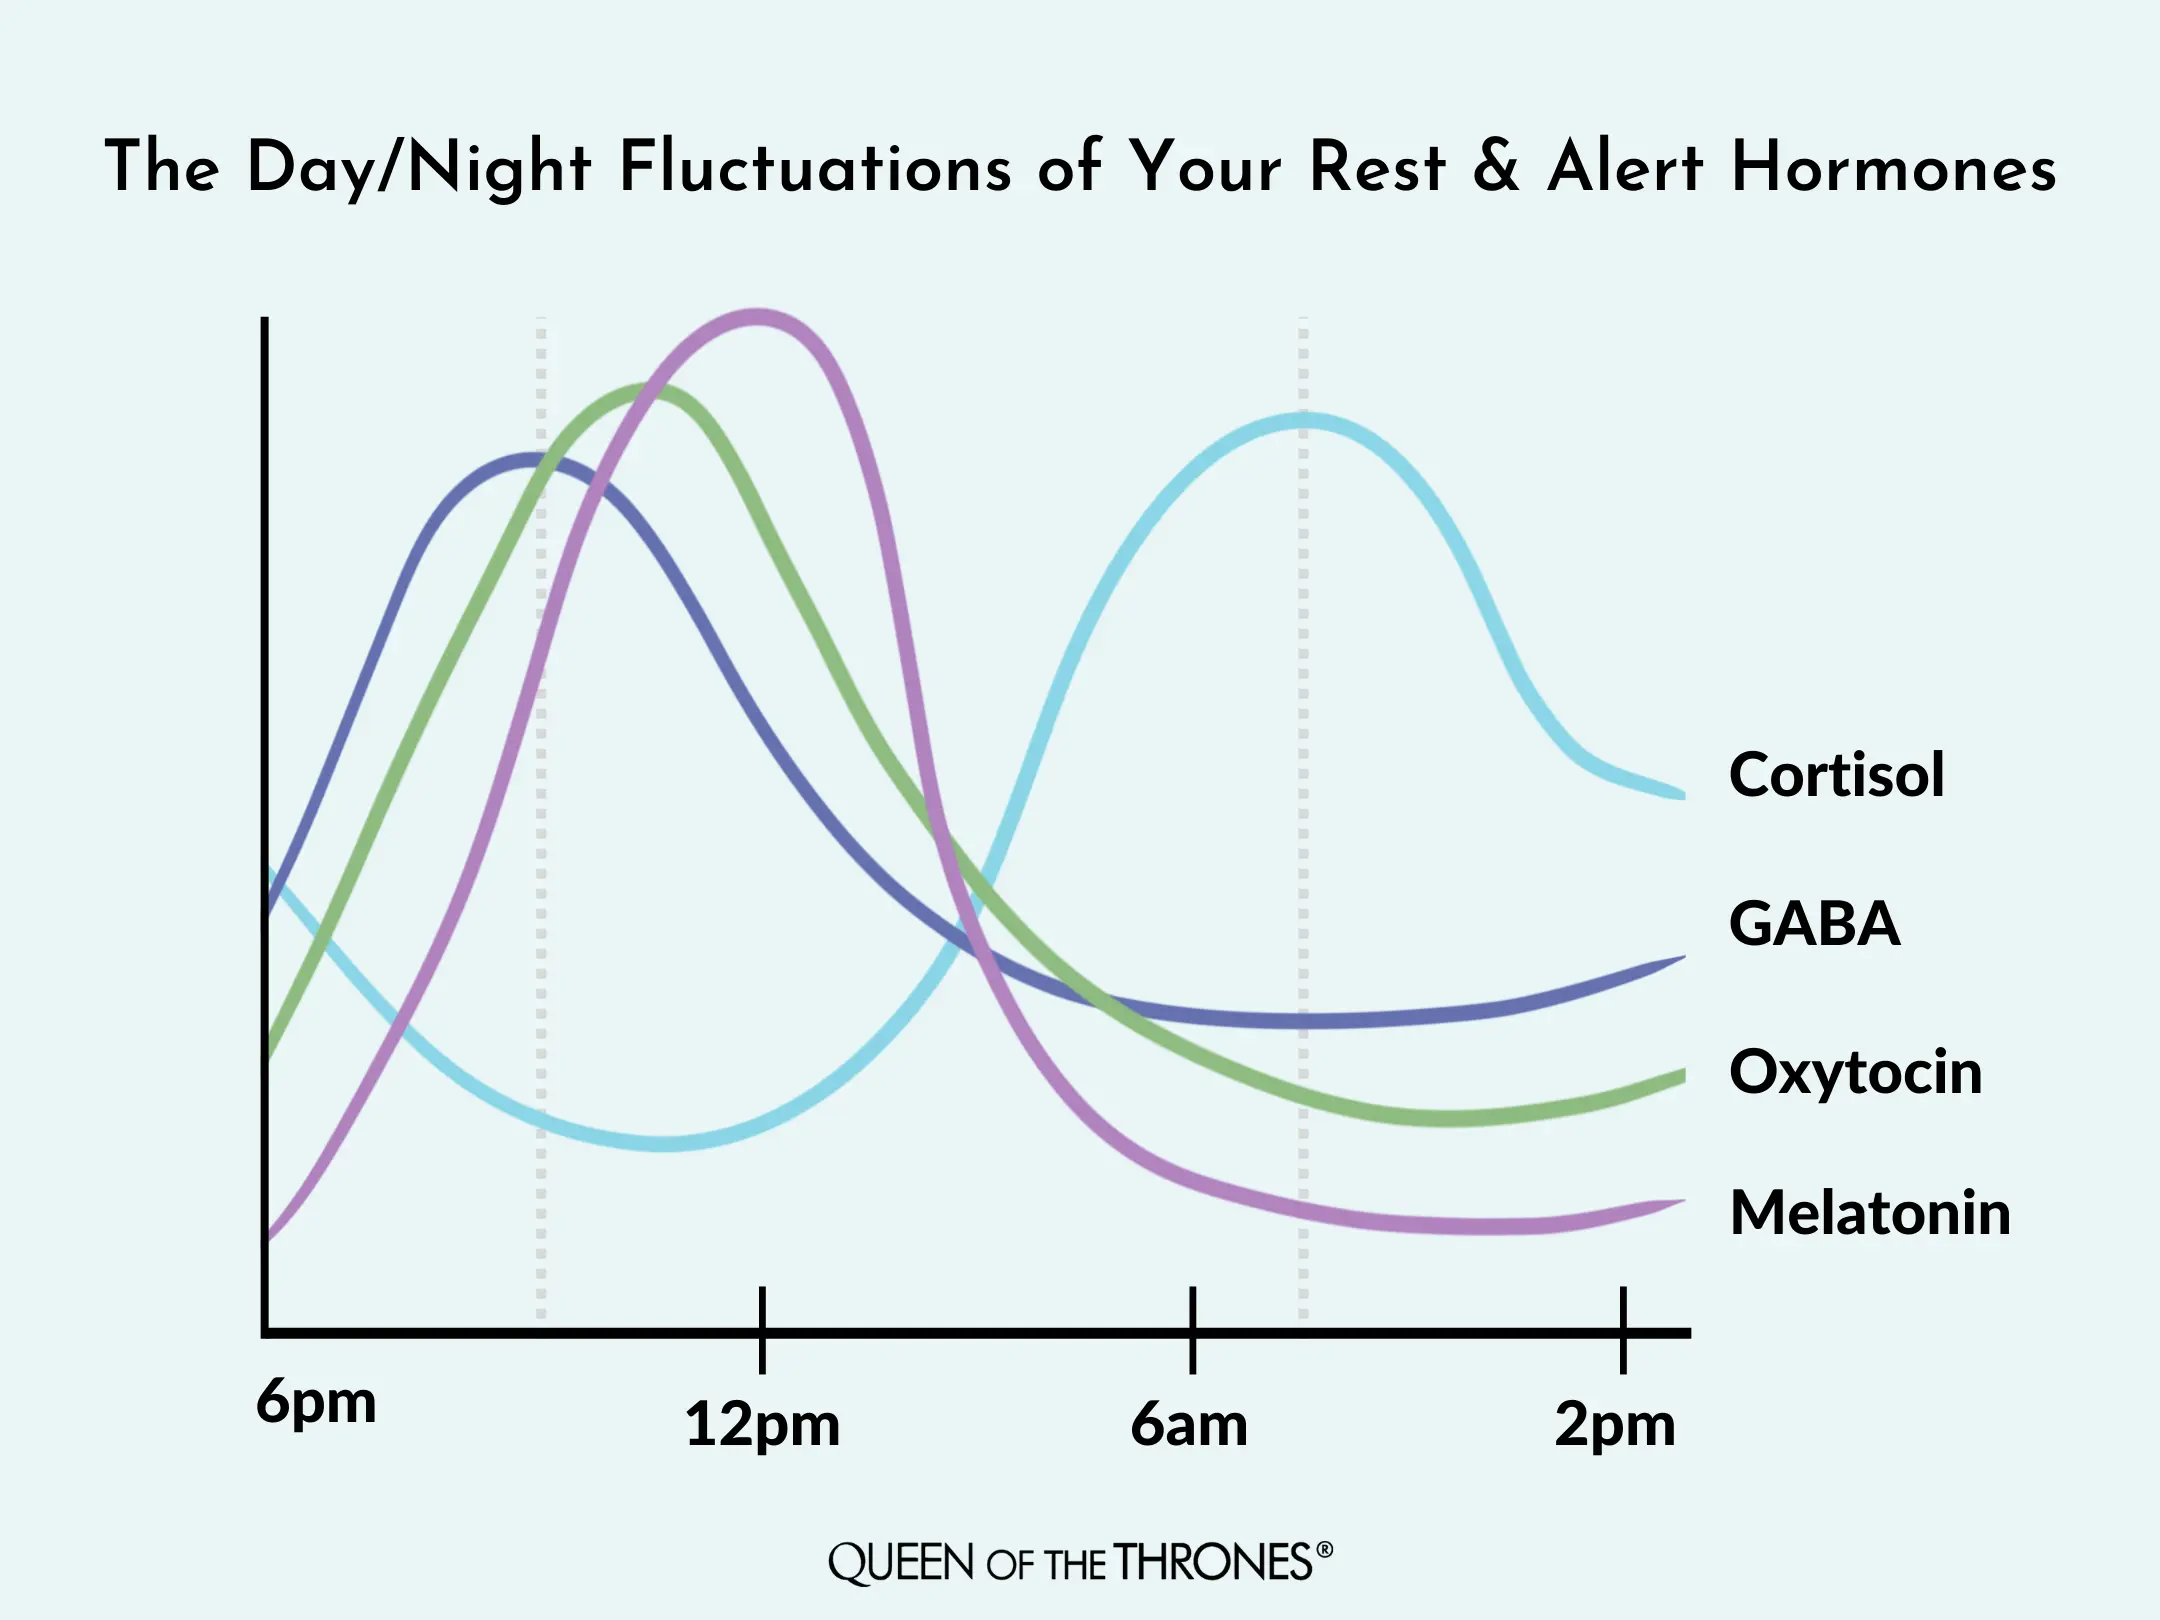 Day and Night Fluctuations ot your Rest and Alert Hormones by Queen of the Thrones